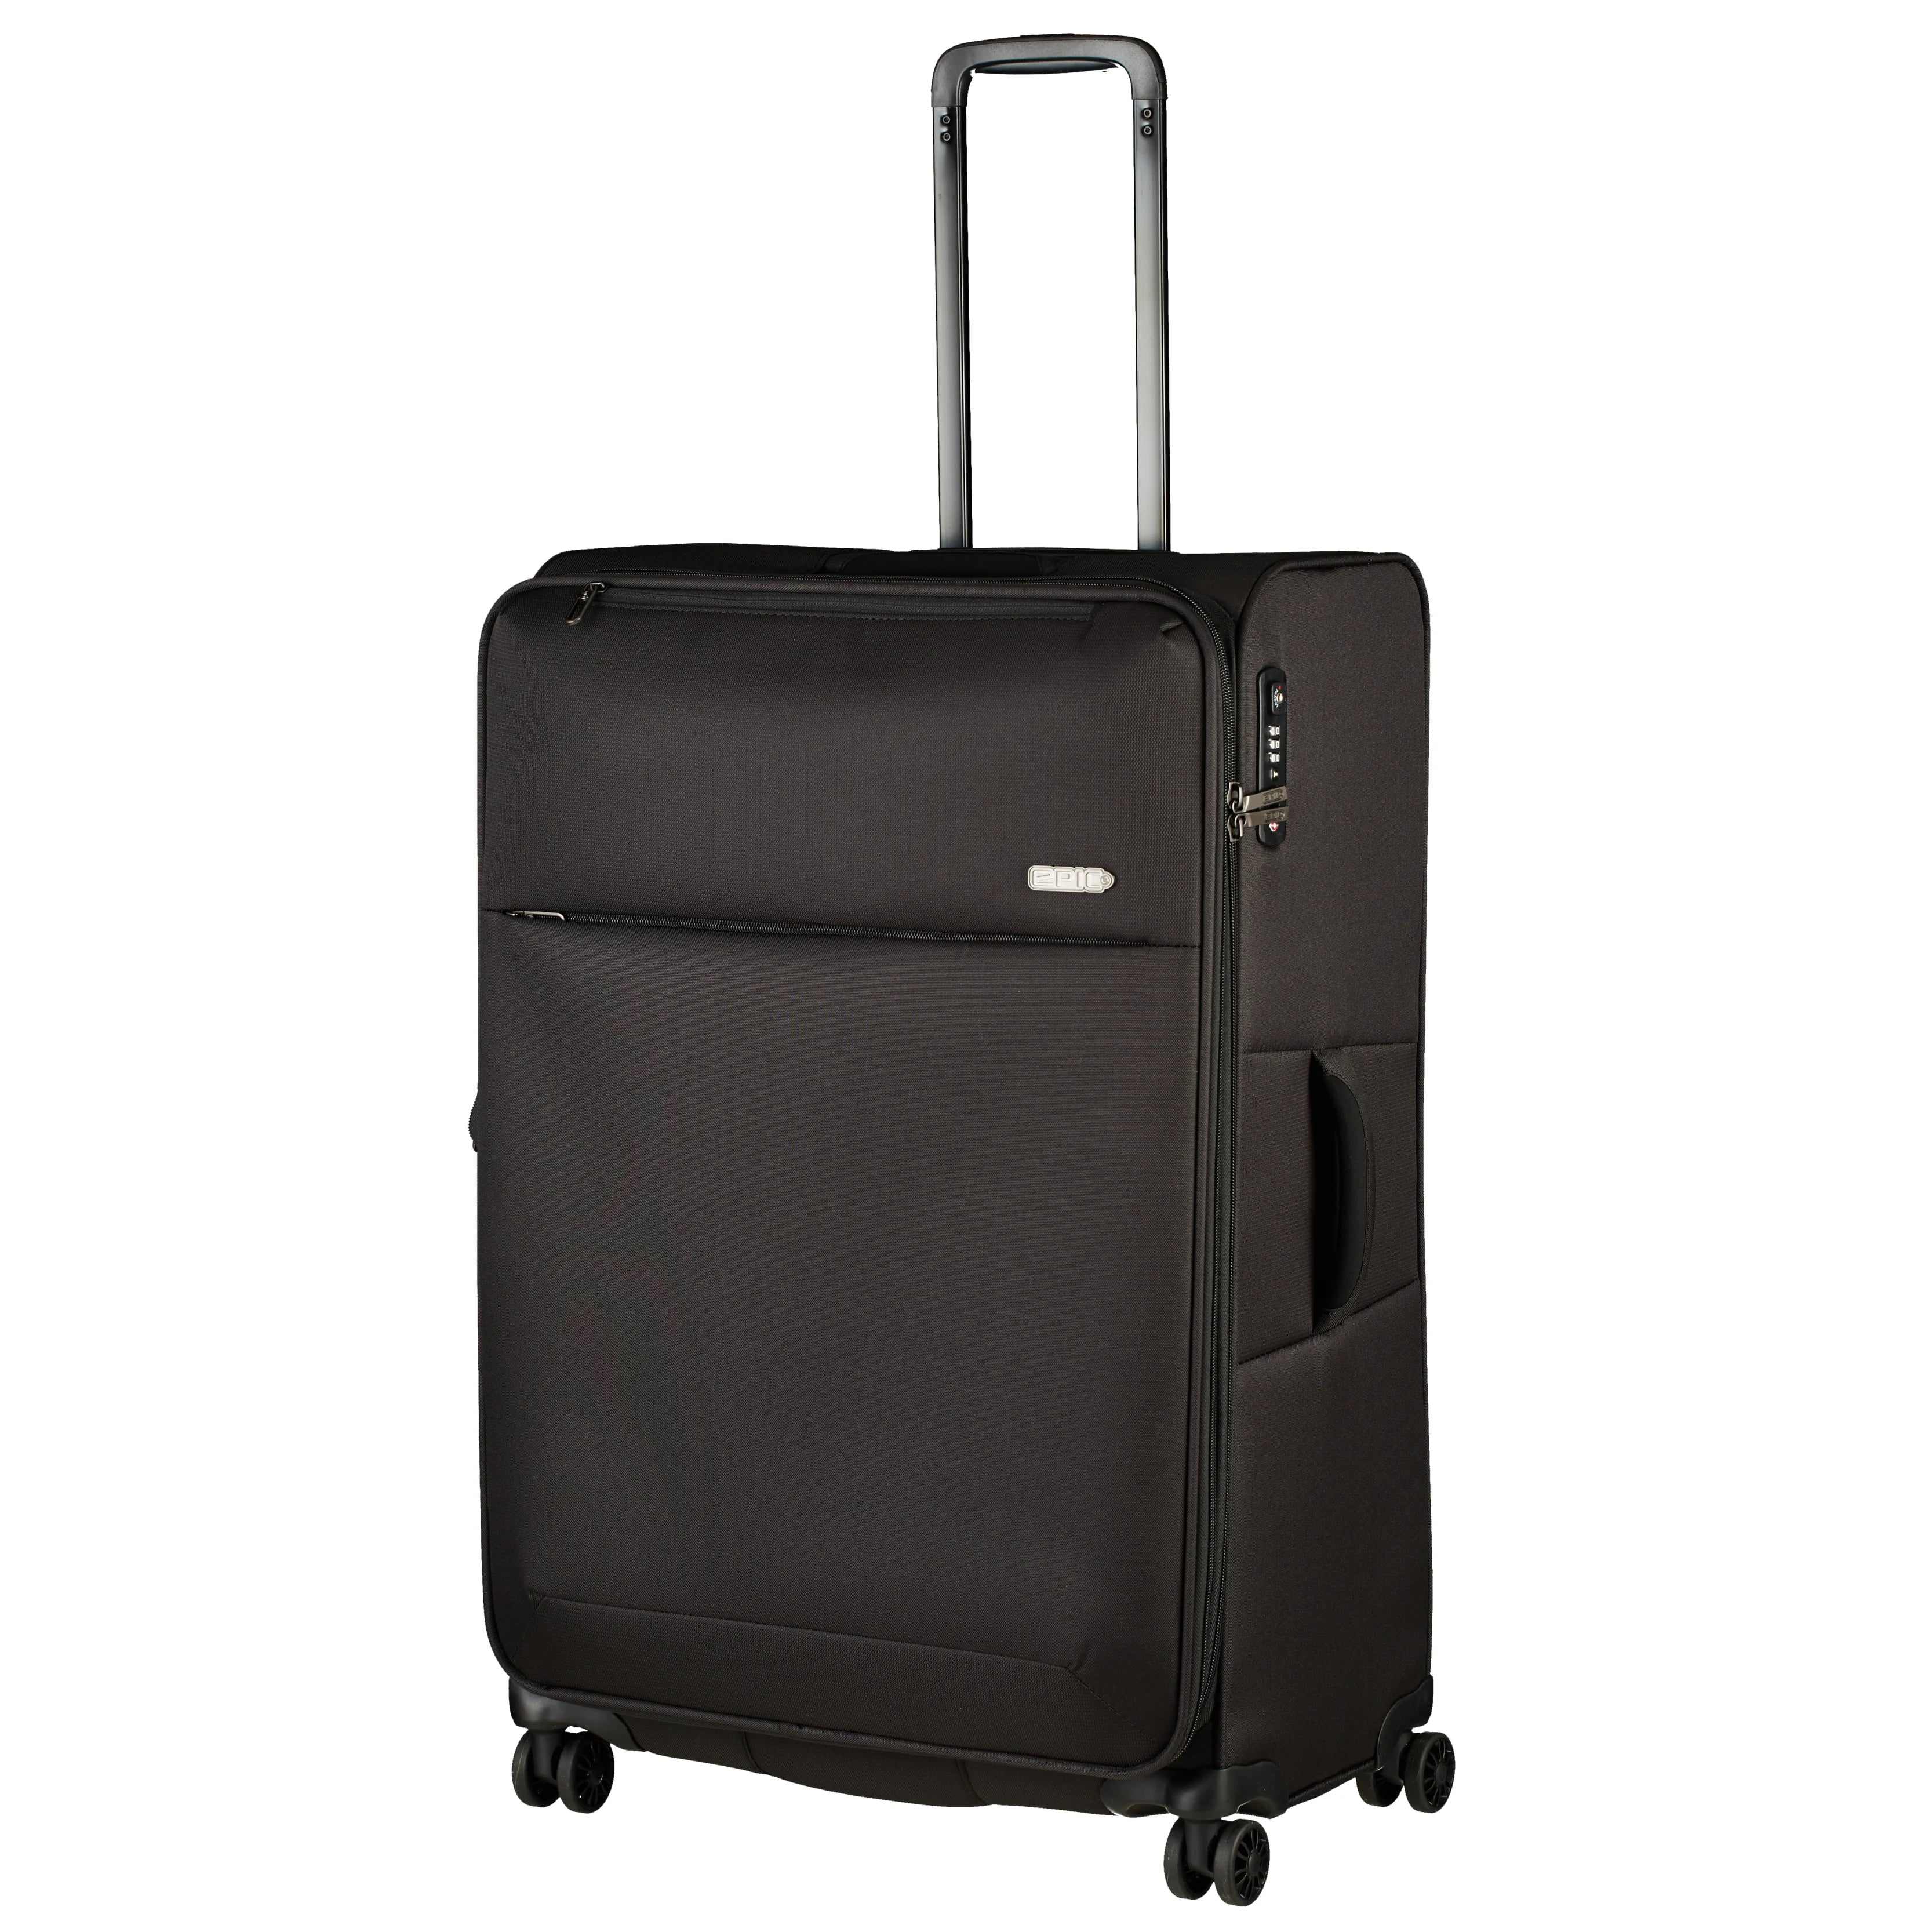 Epic Discovery Neo 4-wheel trolley 67 cm - black